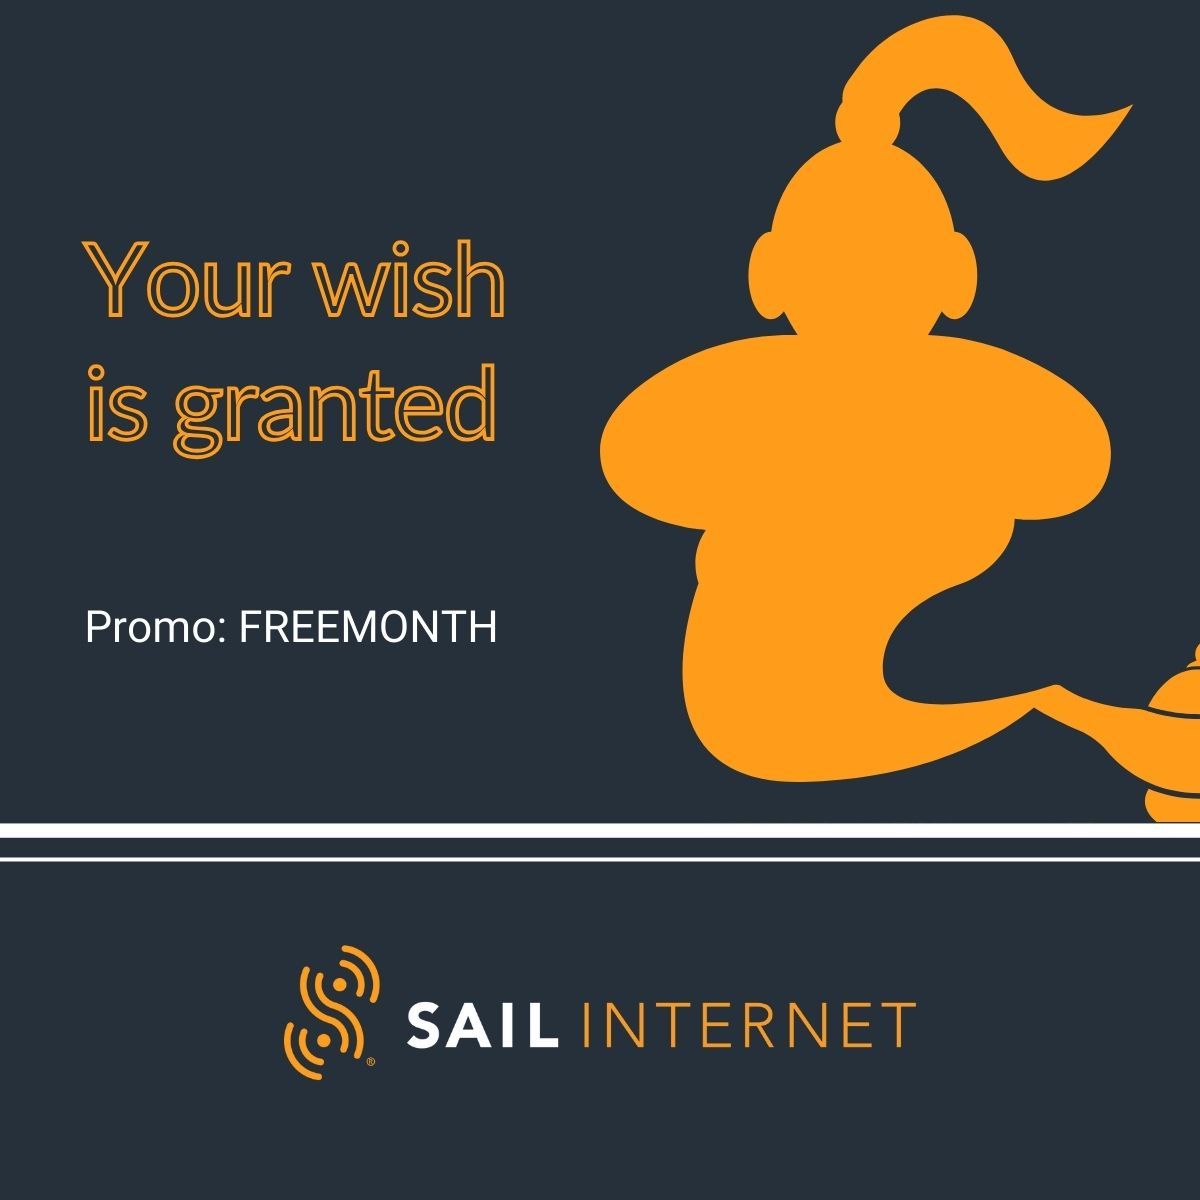 🧞‍♂️At Sail, we make wishes come true.🧞‍♂️
 Join in May and receive a month on us. Use promo: FREEMONTH. 
Check if you’re eligible - sailinternet.com

#CustomerFirst #internetserviceprovider